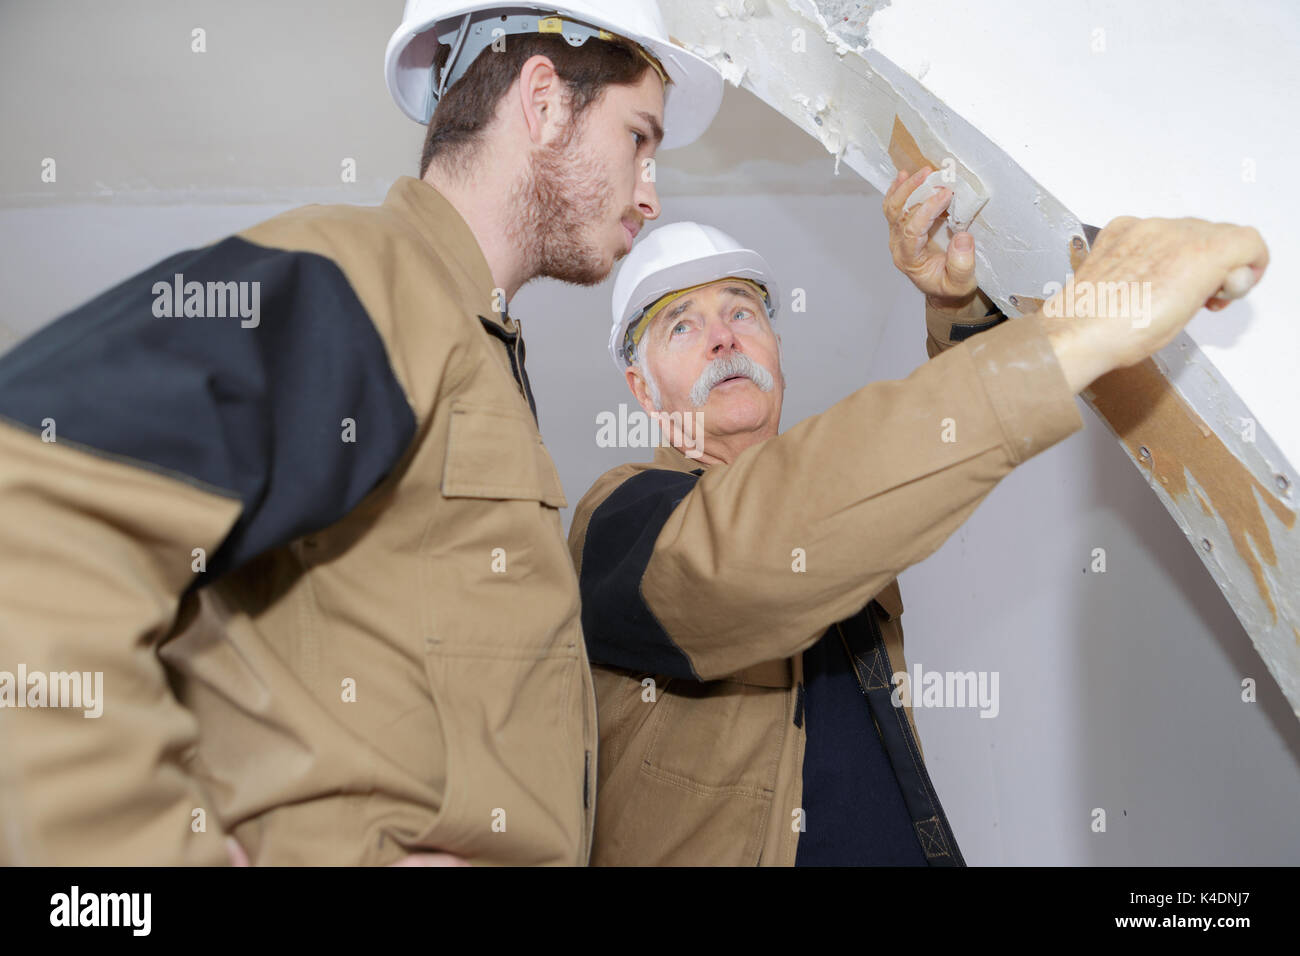 Smiling Builders In Hardhat Removing Paint On Wall Indoors Stock